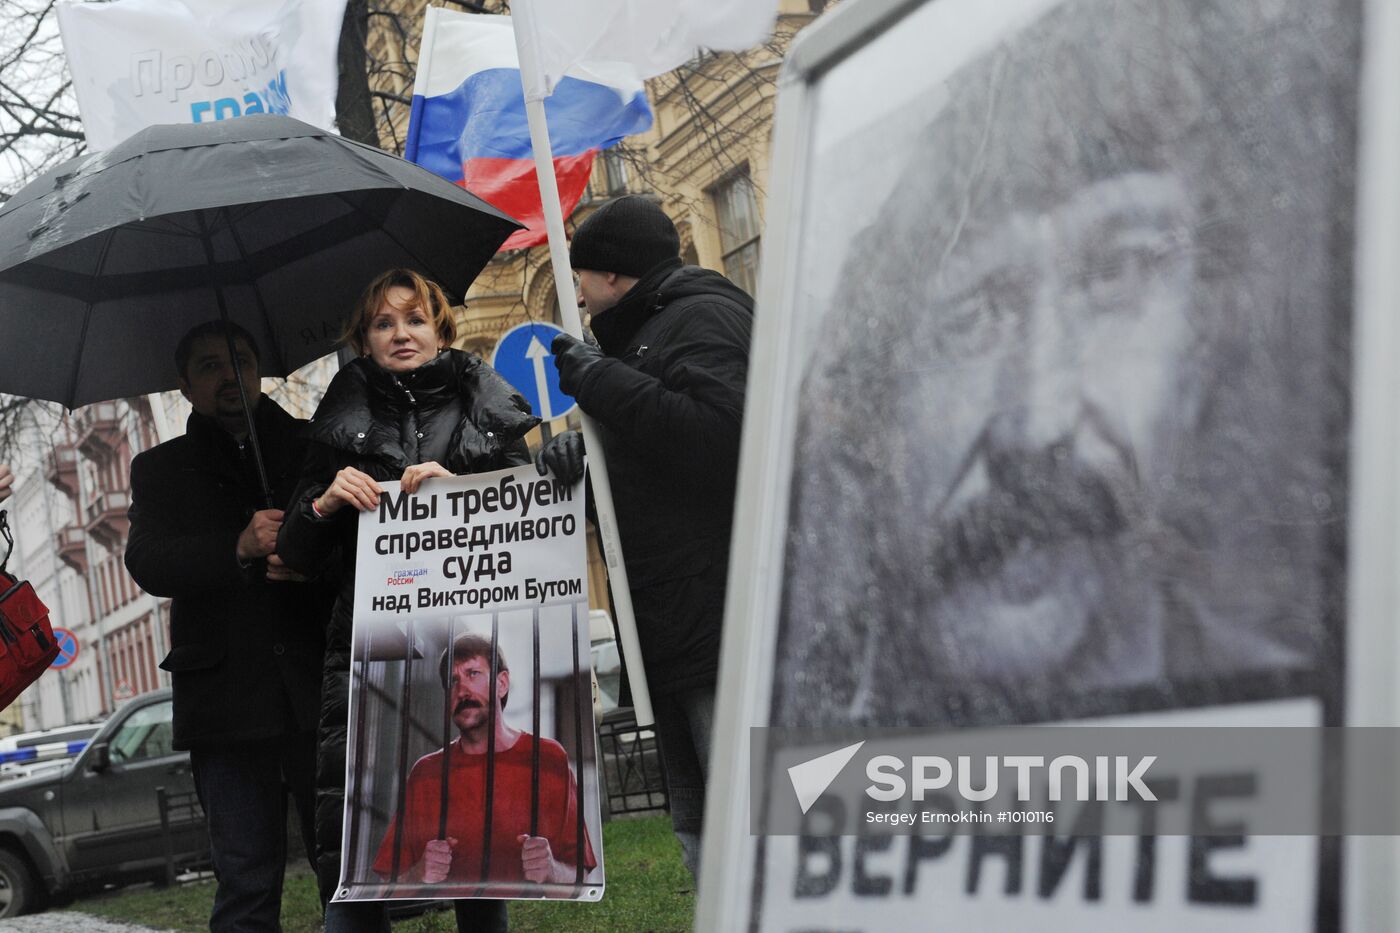 Viktor Bout's wife participating in US consular office picket